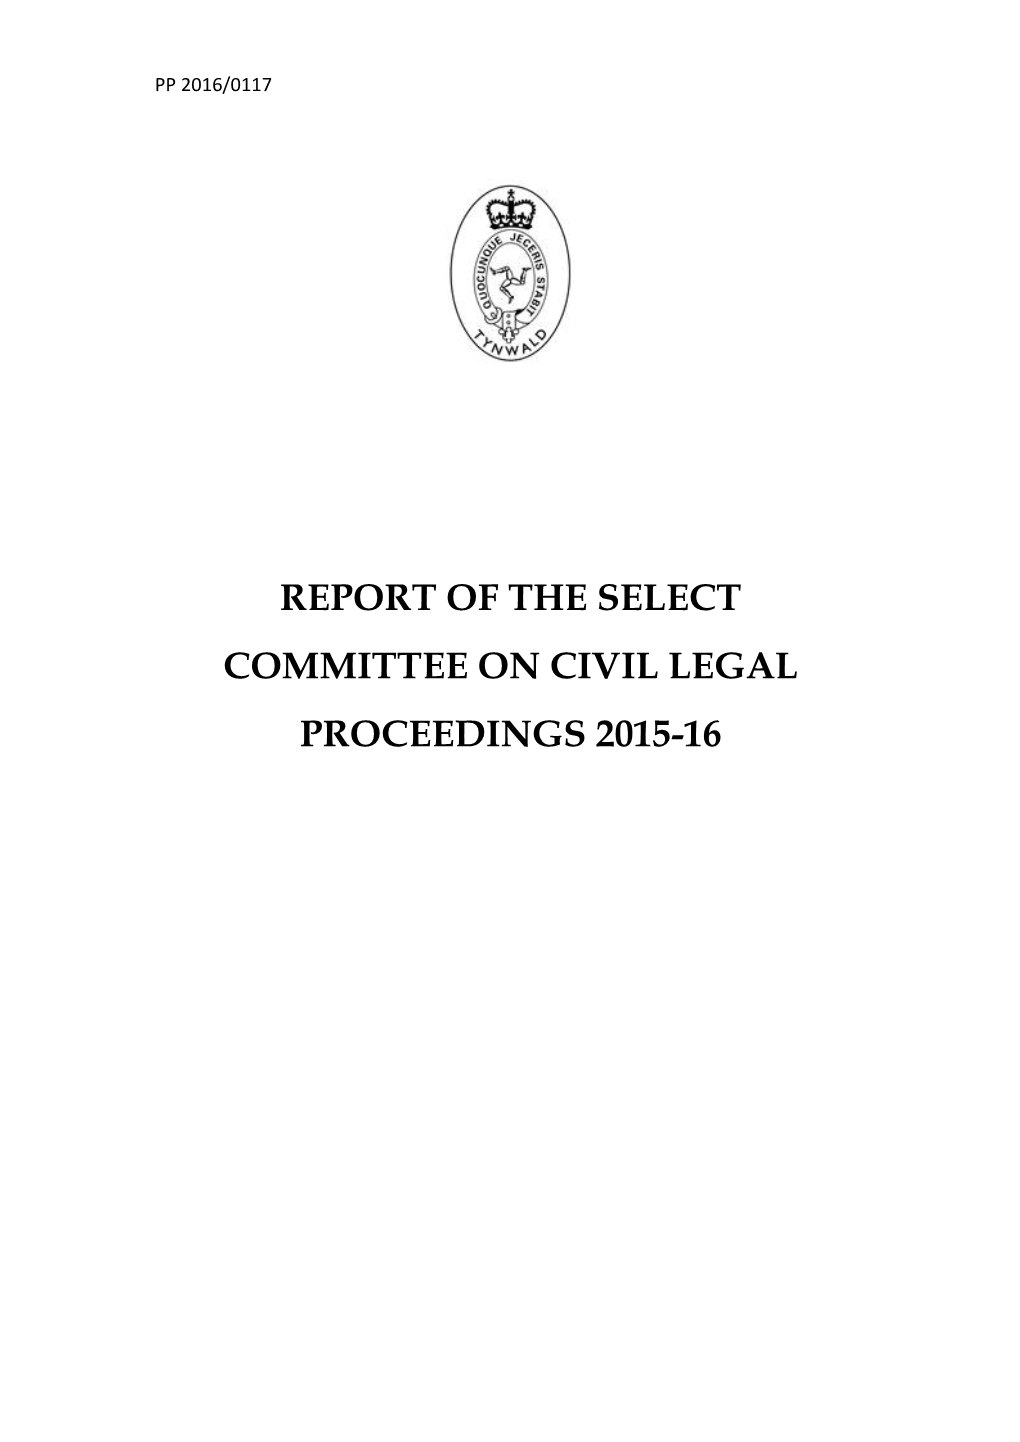 Report of the Select Committee on Civil Legal Proceedings 2015-16